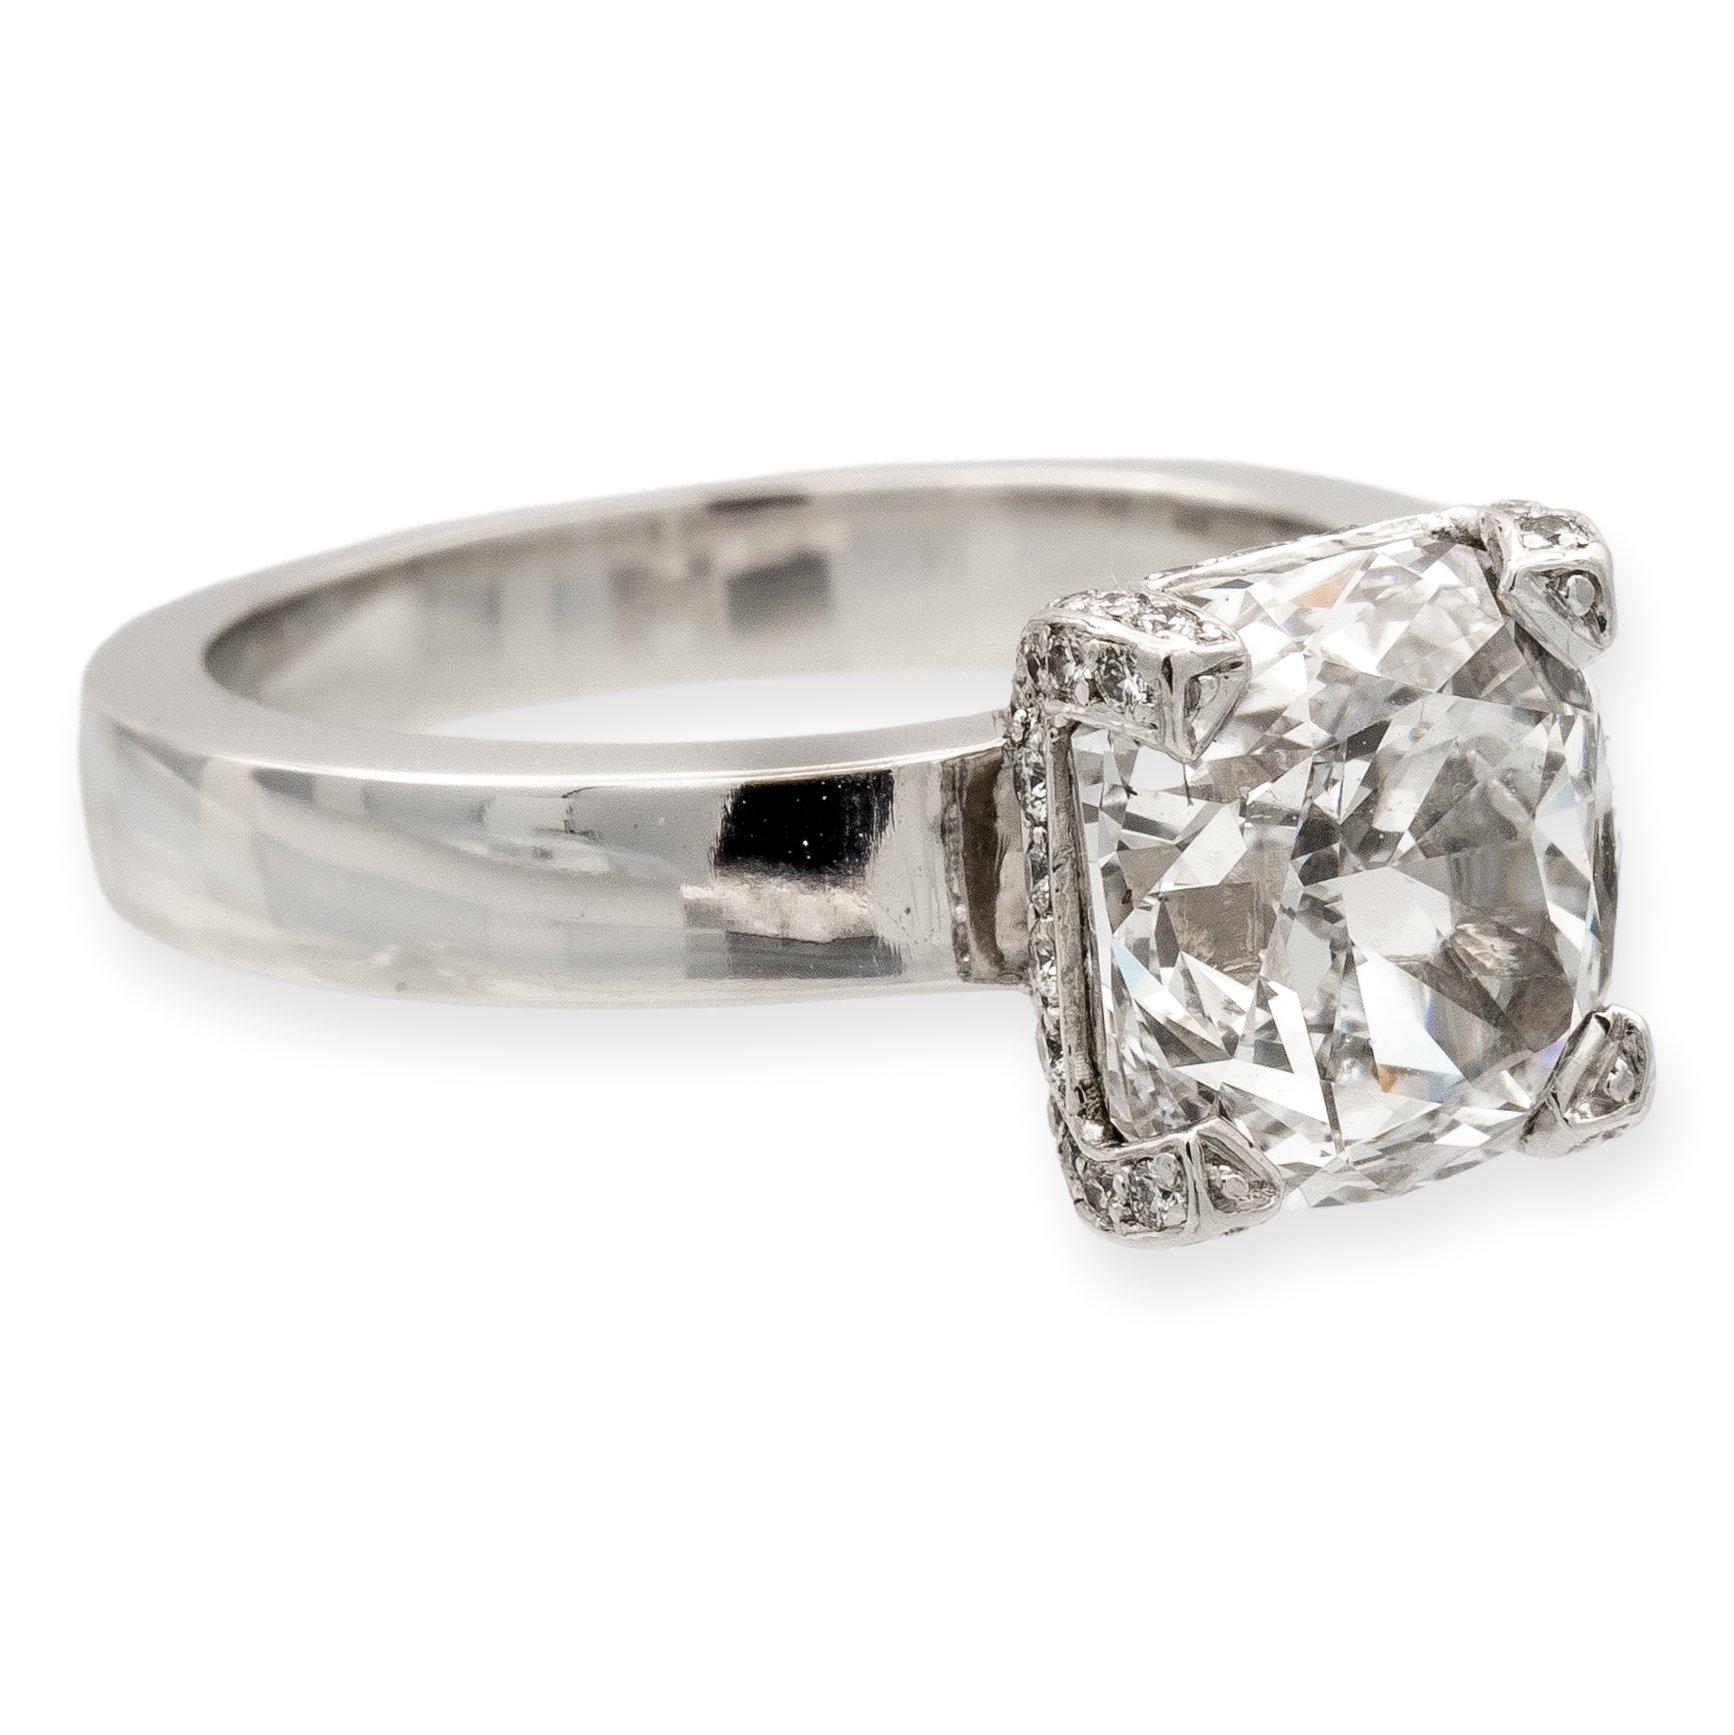 Solitaire diamond engagement ring featuring a Cushion brilliant cut diamond center weighing 3.72 carats G color and VS2 clarity certified by the GIA (Gemological Institute of America) adorned with a hidden halo of pave set round brilliant cut